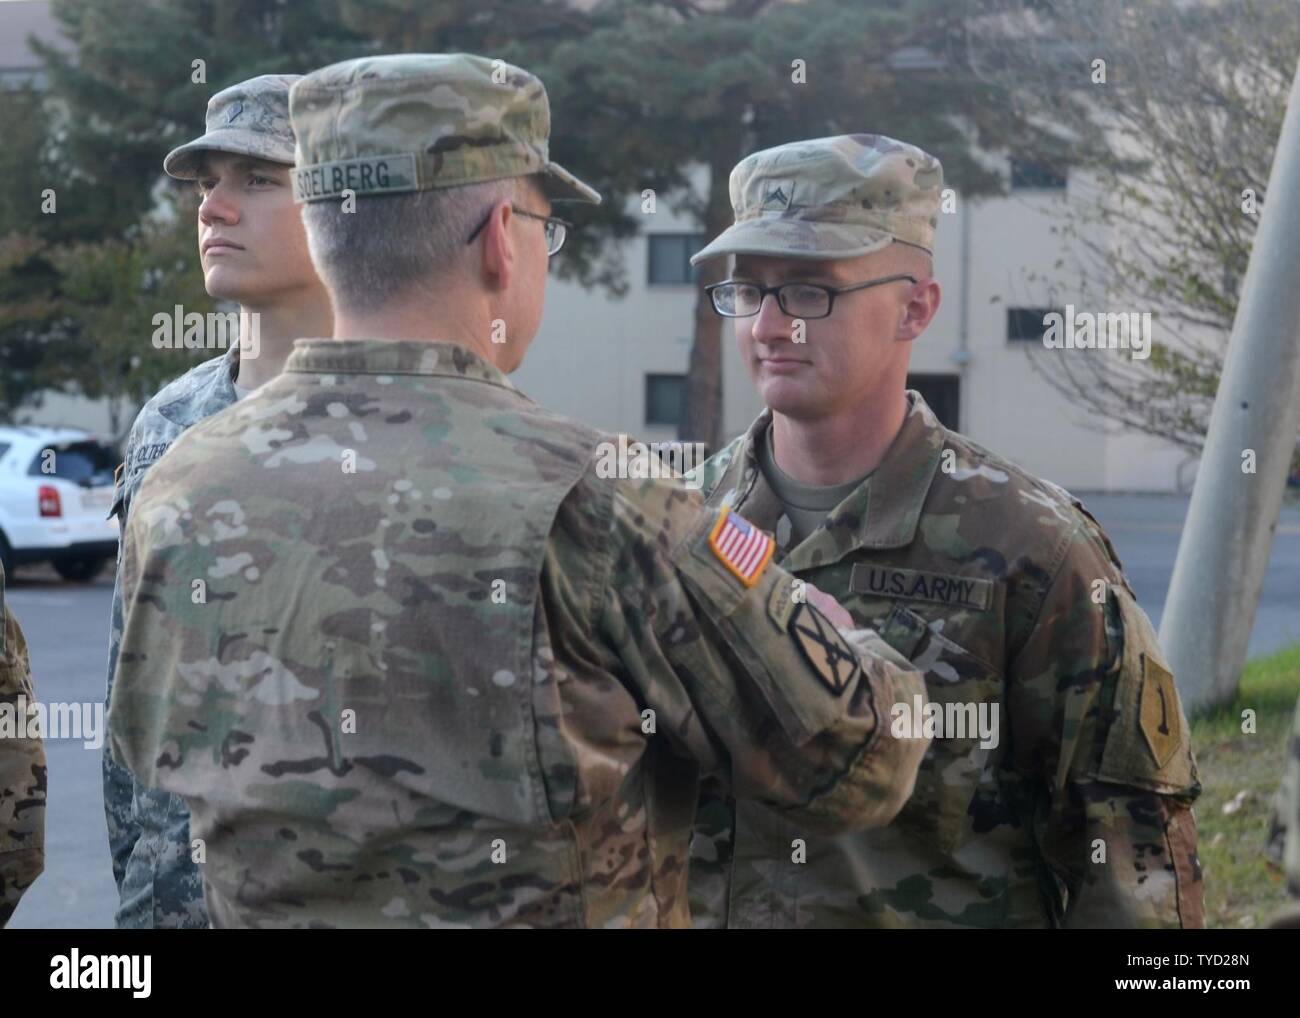 CAMP CASEY, Republic of Korea – Maj. Brent Soelberg (left), the automations management officer for the 2nd Infantry Division, pins the rank of sergeant onto his son, Sgt. Austin Soelberg, a tank crewmember with 2nd Battalion, 34th Armor Regiment, 1st Armored Brigade Combat Team, 1st Inf. Div., during a promotion ceremony Nov. 1.  The Soelbergs, both from Ogden, Utah, are both currently serving in different units on the Korean peninsula, making the promotion ceremony a unique opportunity for both Soldiers. Stock Photo